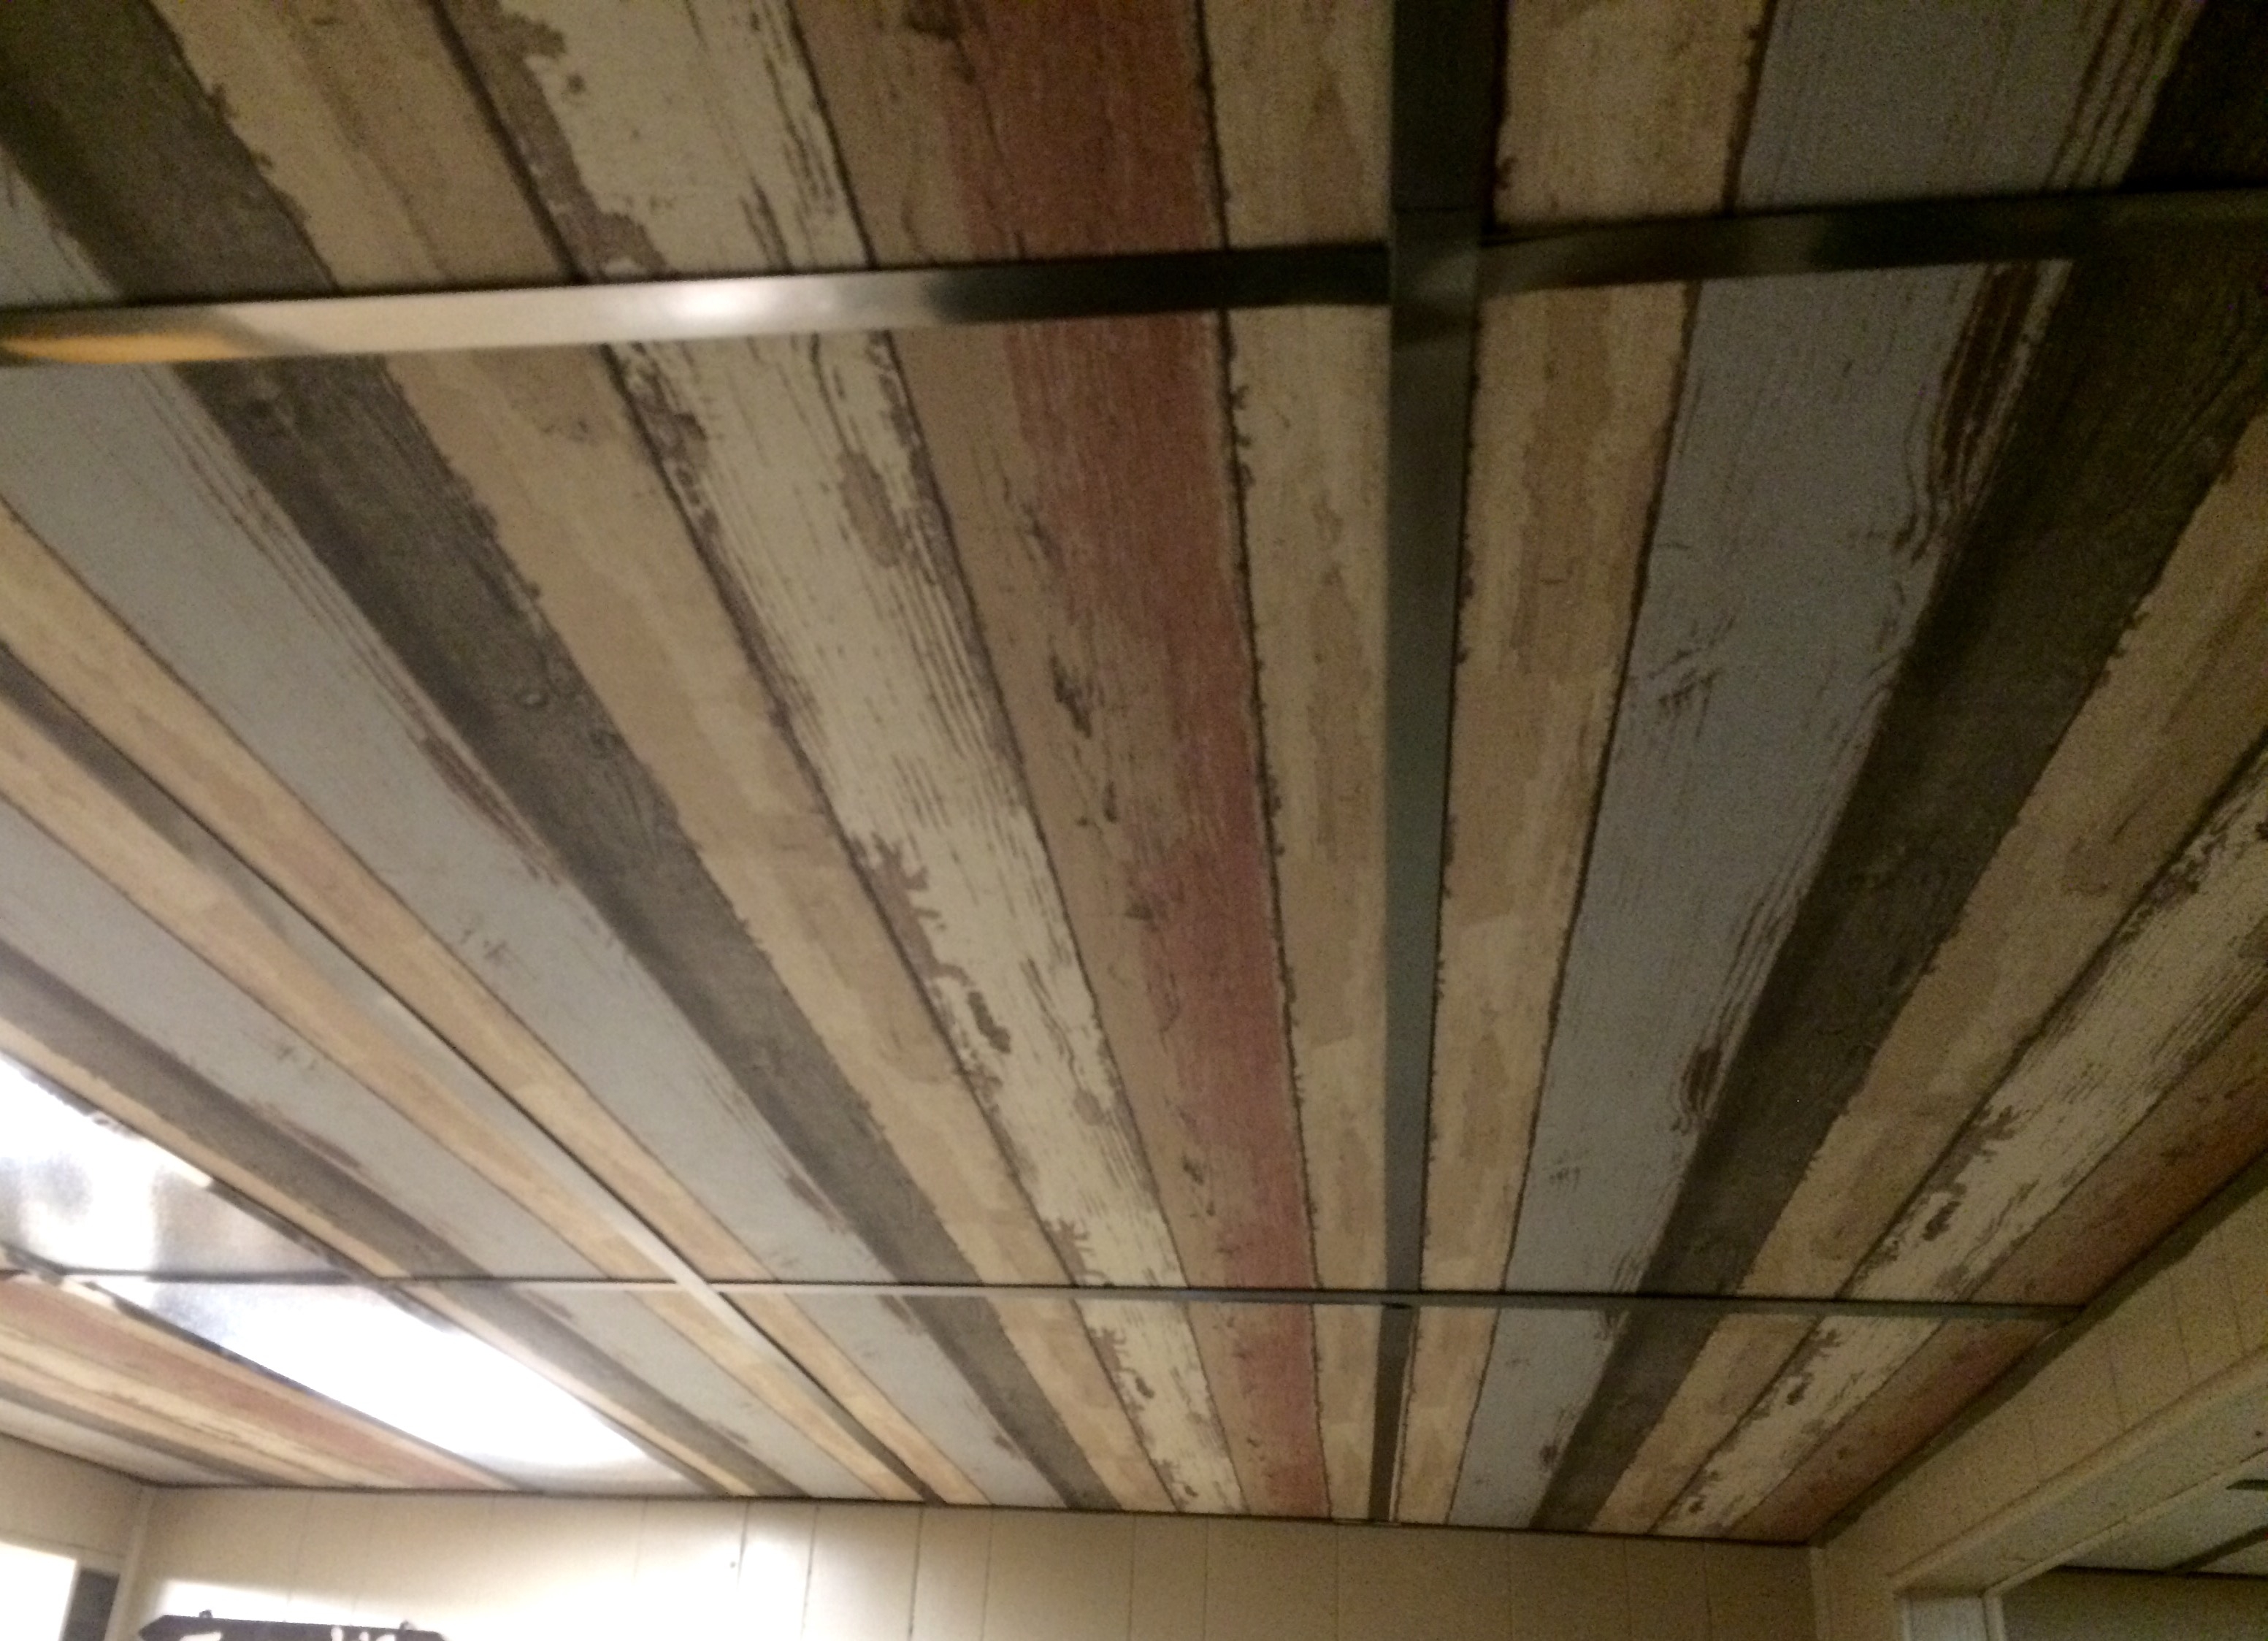 Covering Ceiling Tiles With Wallpaper Covering Ceiling Tiles With Wallpaper dropped ceiling i wallpapered the old ceiling tiles i covered 3106 X 2247